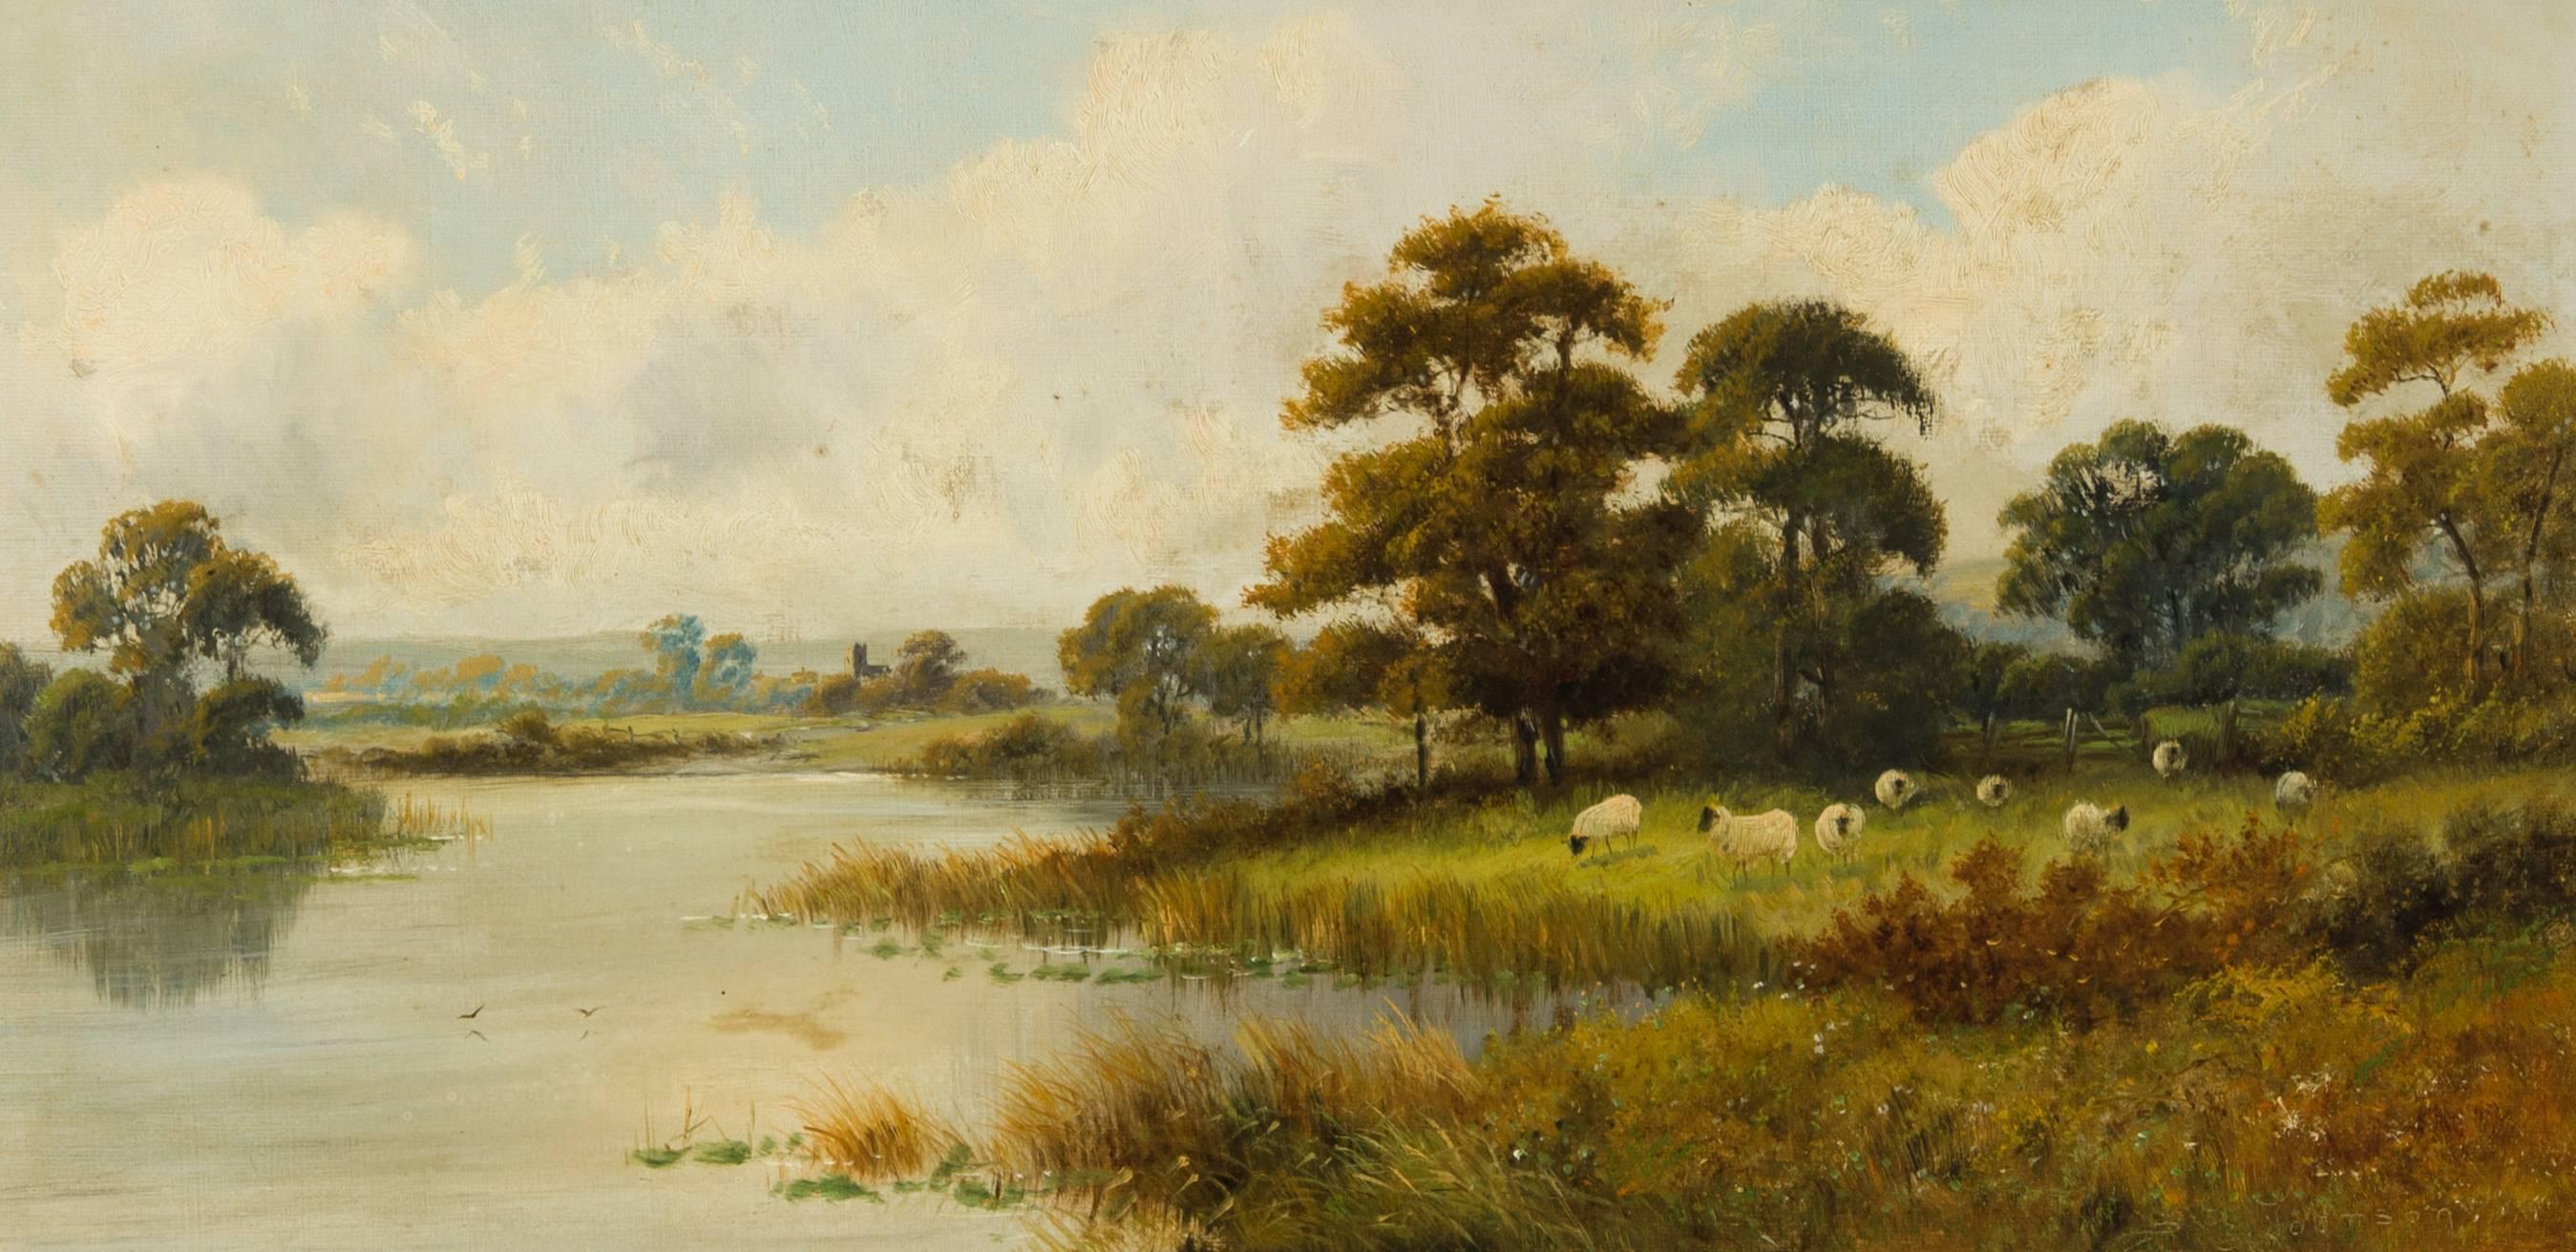 A signed late 19th - early 20th century oil painting by the well listed English artist Sidney Yates Johnson (fl. 1890-1926), depicting a river landscape near Old Basing, Basingstoke, in England. Signed to the lower right and further inscribed with